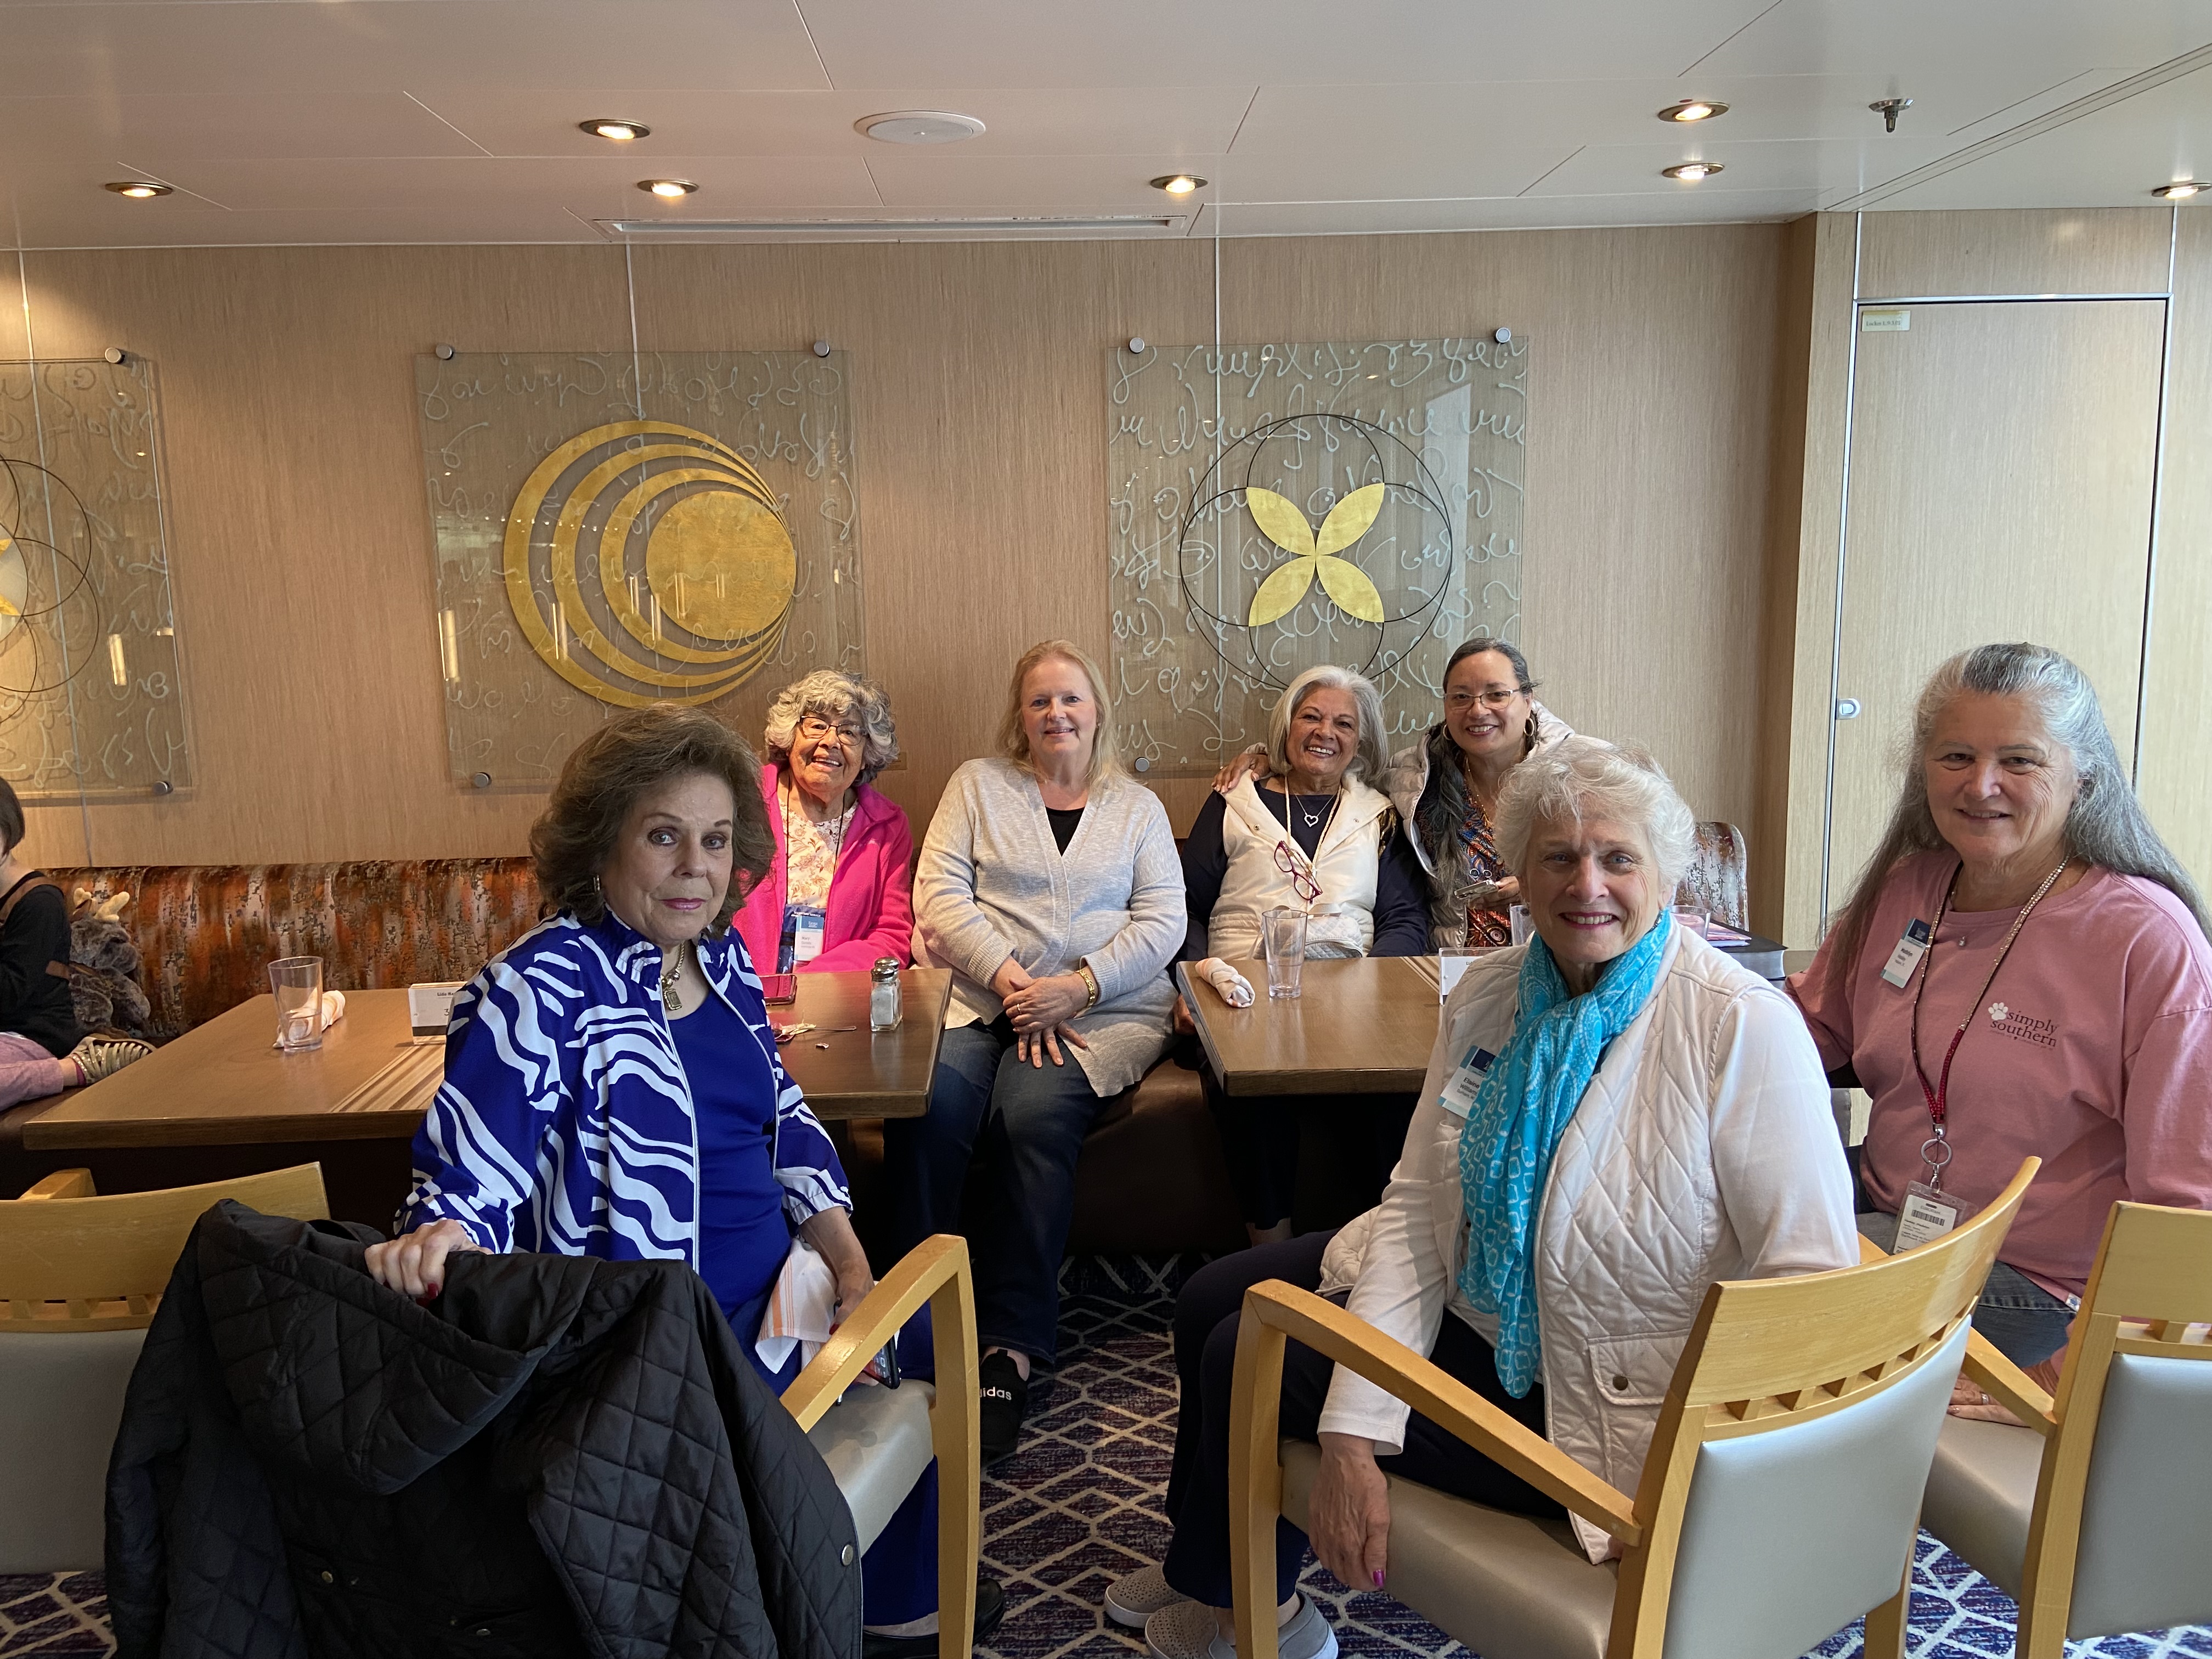 A group of ladies sitting at a cruise table smiling for the camera